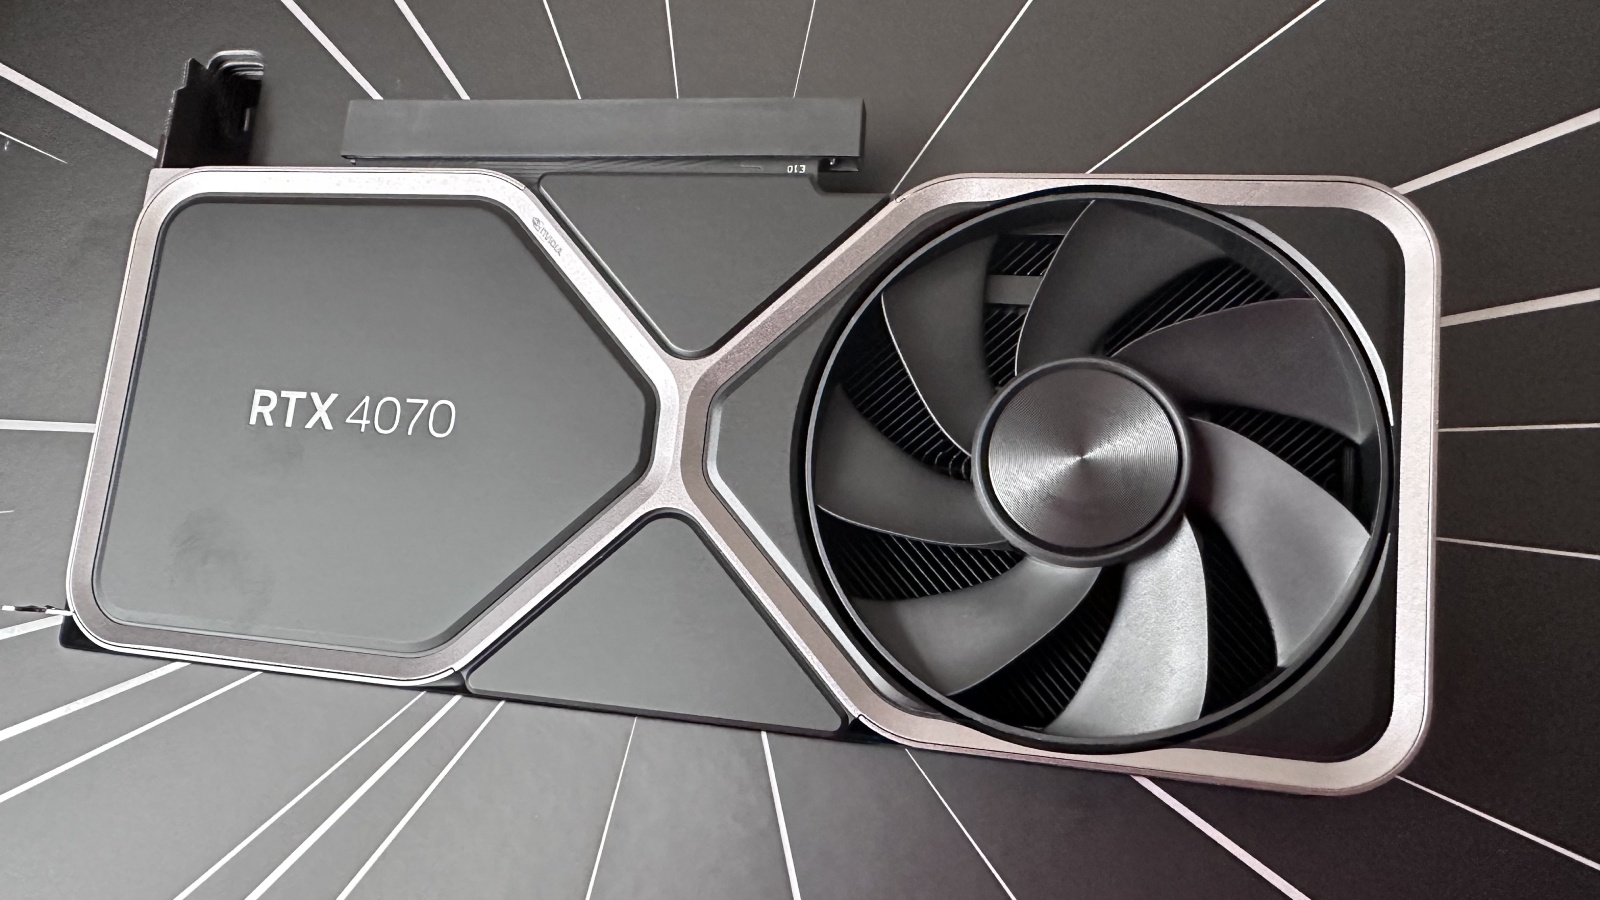 Nvidia RTX 4080 Super and 4070 Super Series: News, Specs, Expected Price &  Release Date